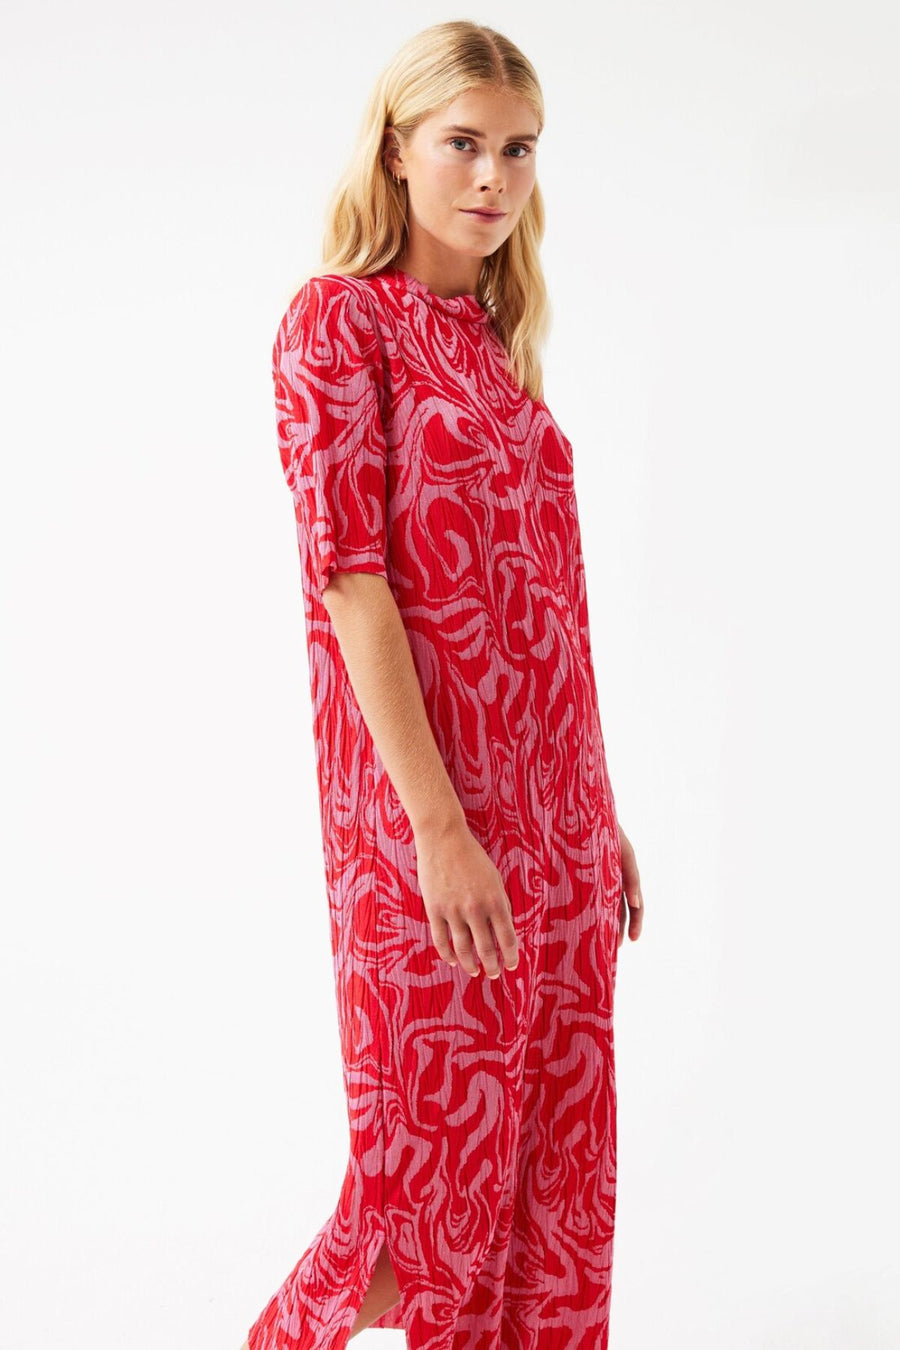 FQCHARM - DRESS WITH GRAPHIC PRINT - RED AND ROSE